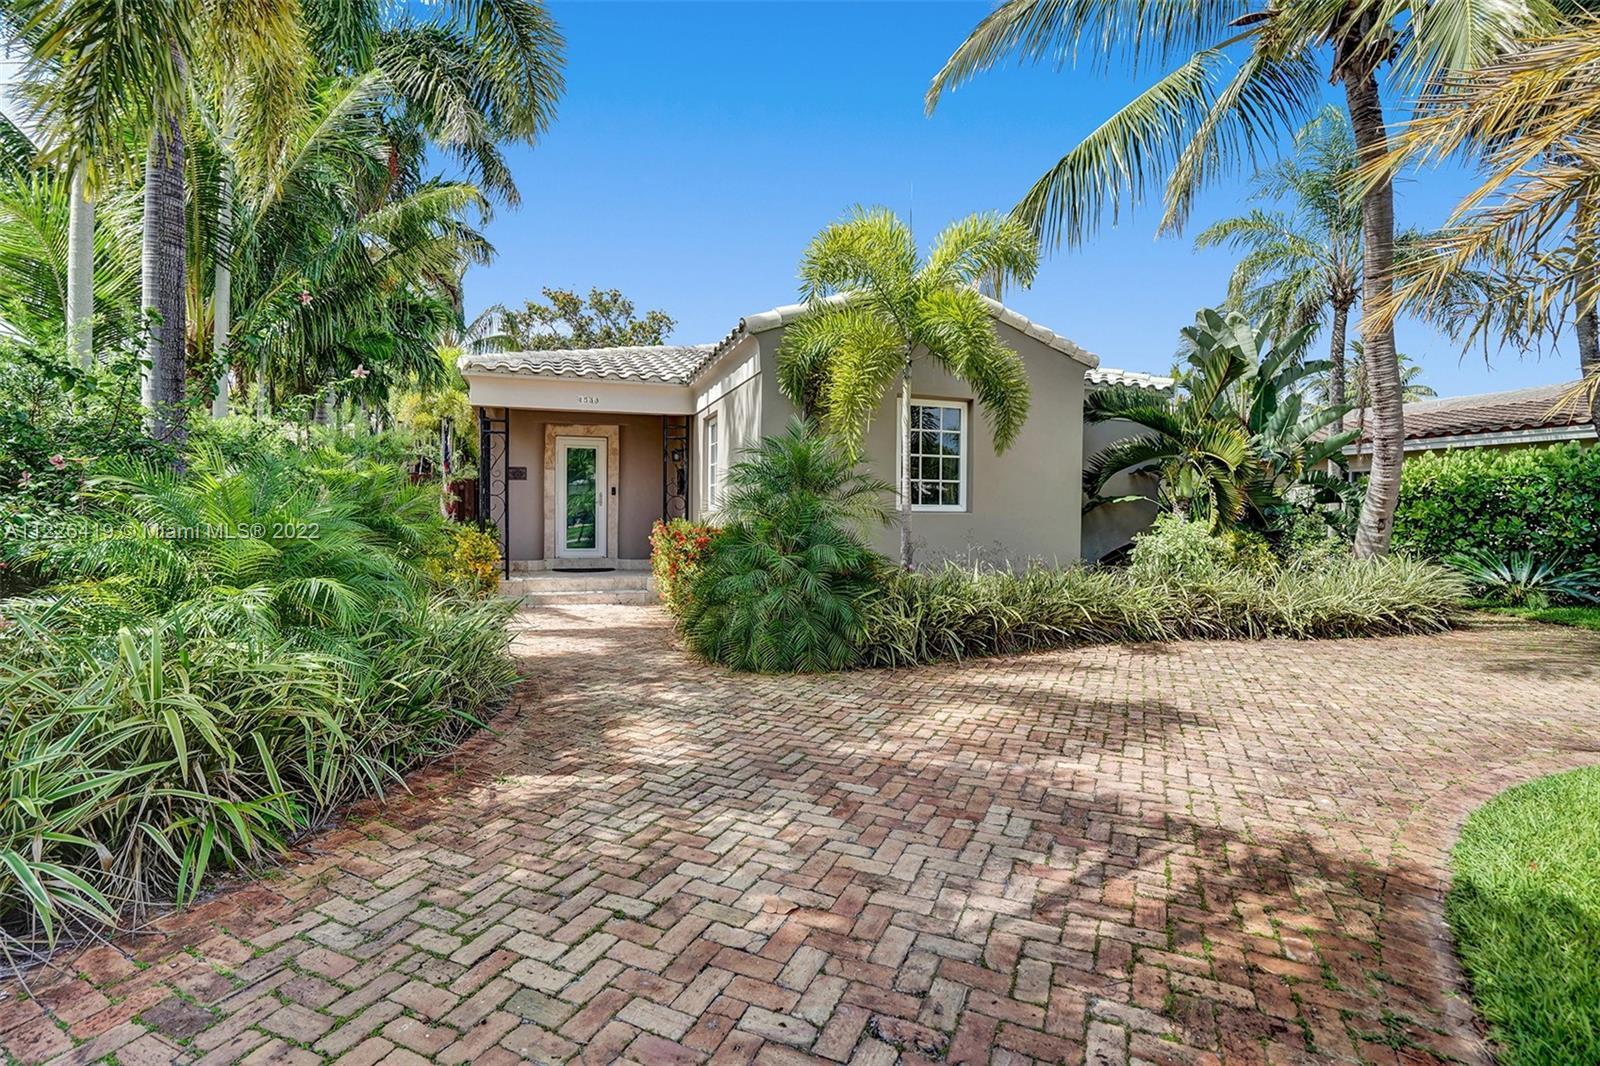 Check out this lovely, well kept historic home in the heart of Hollywood Lakes within a mile to the 